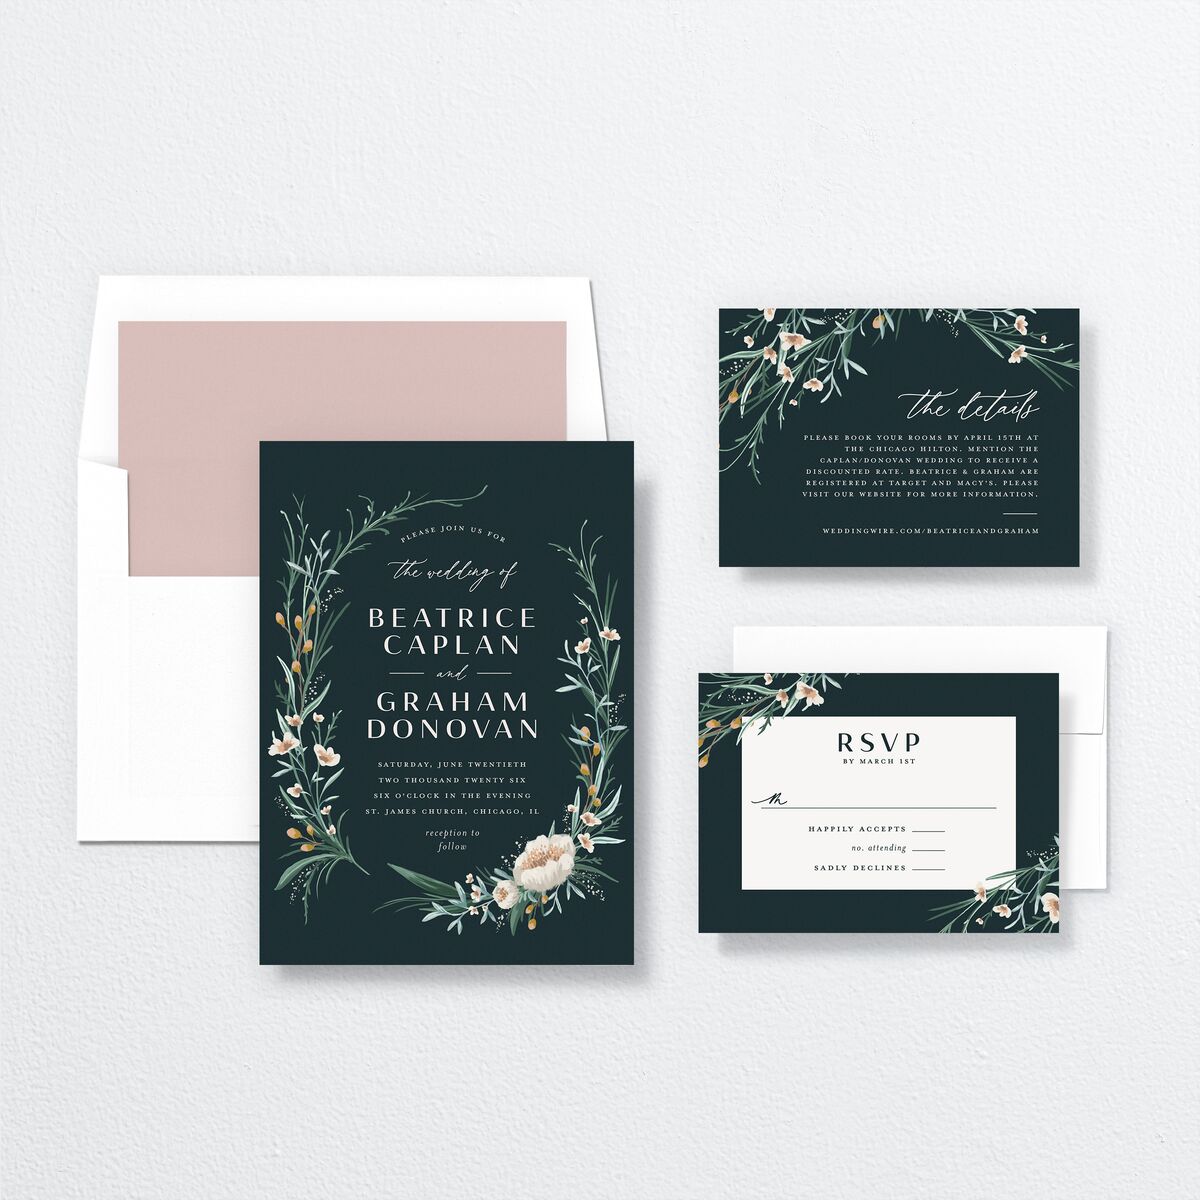 Floral Garland Wedding Invitations suite in Green